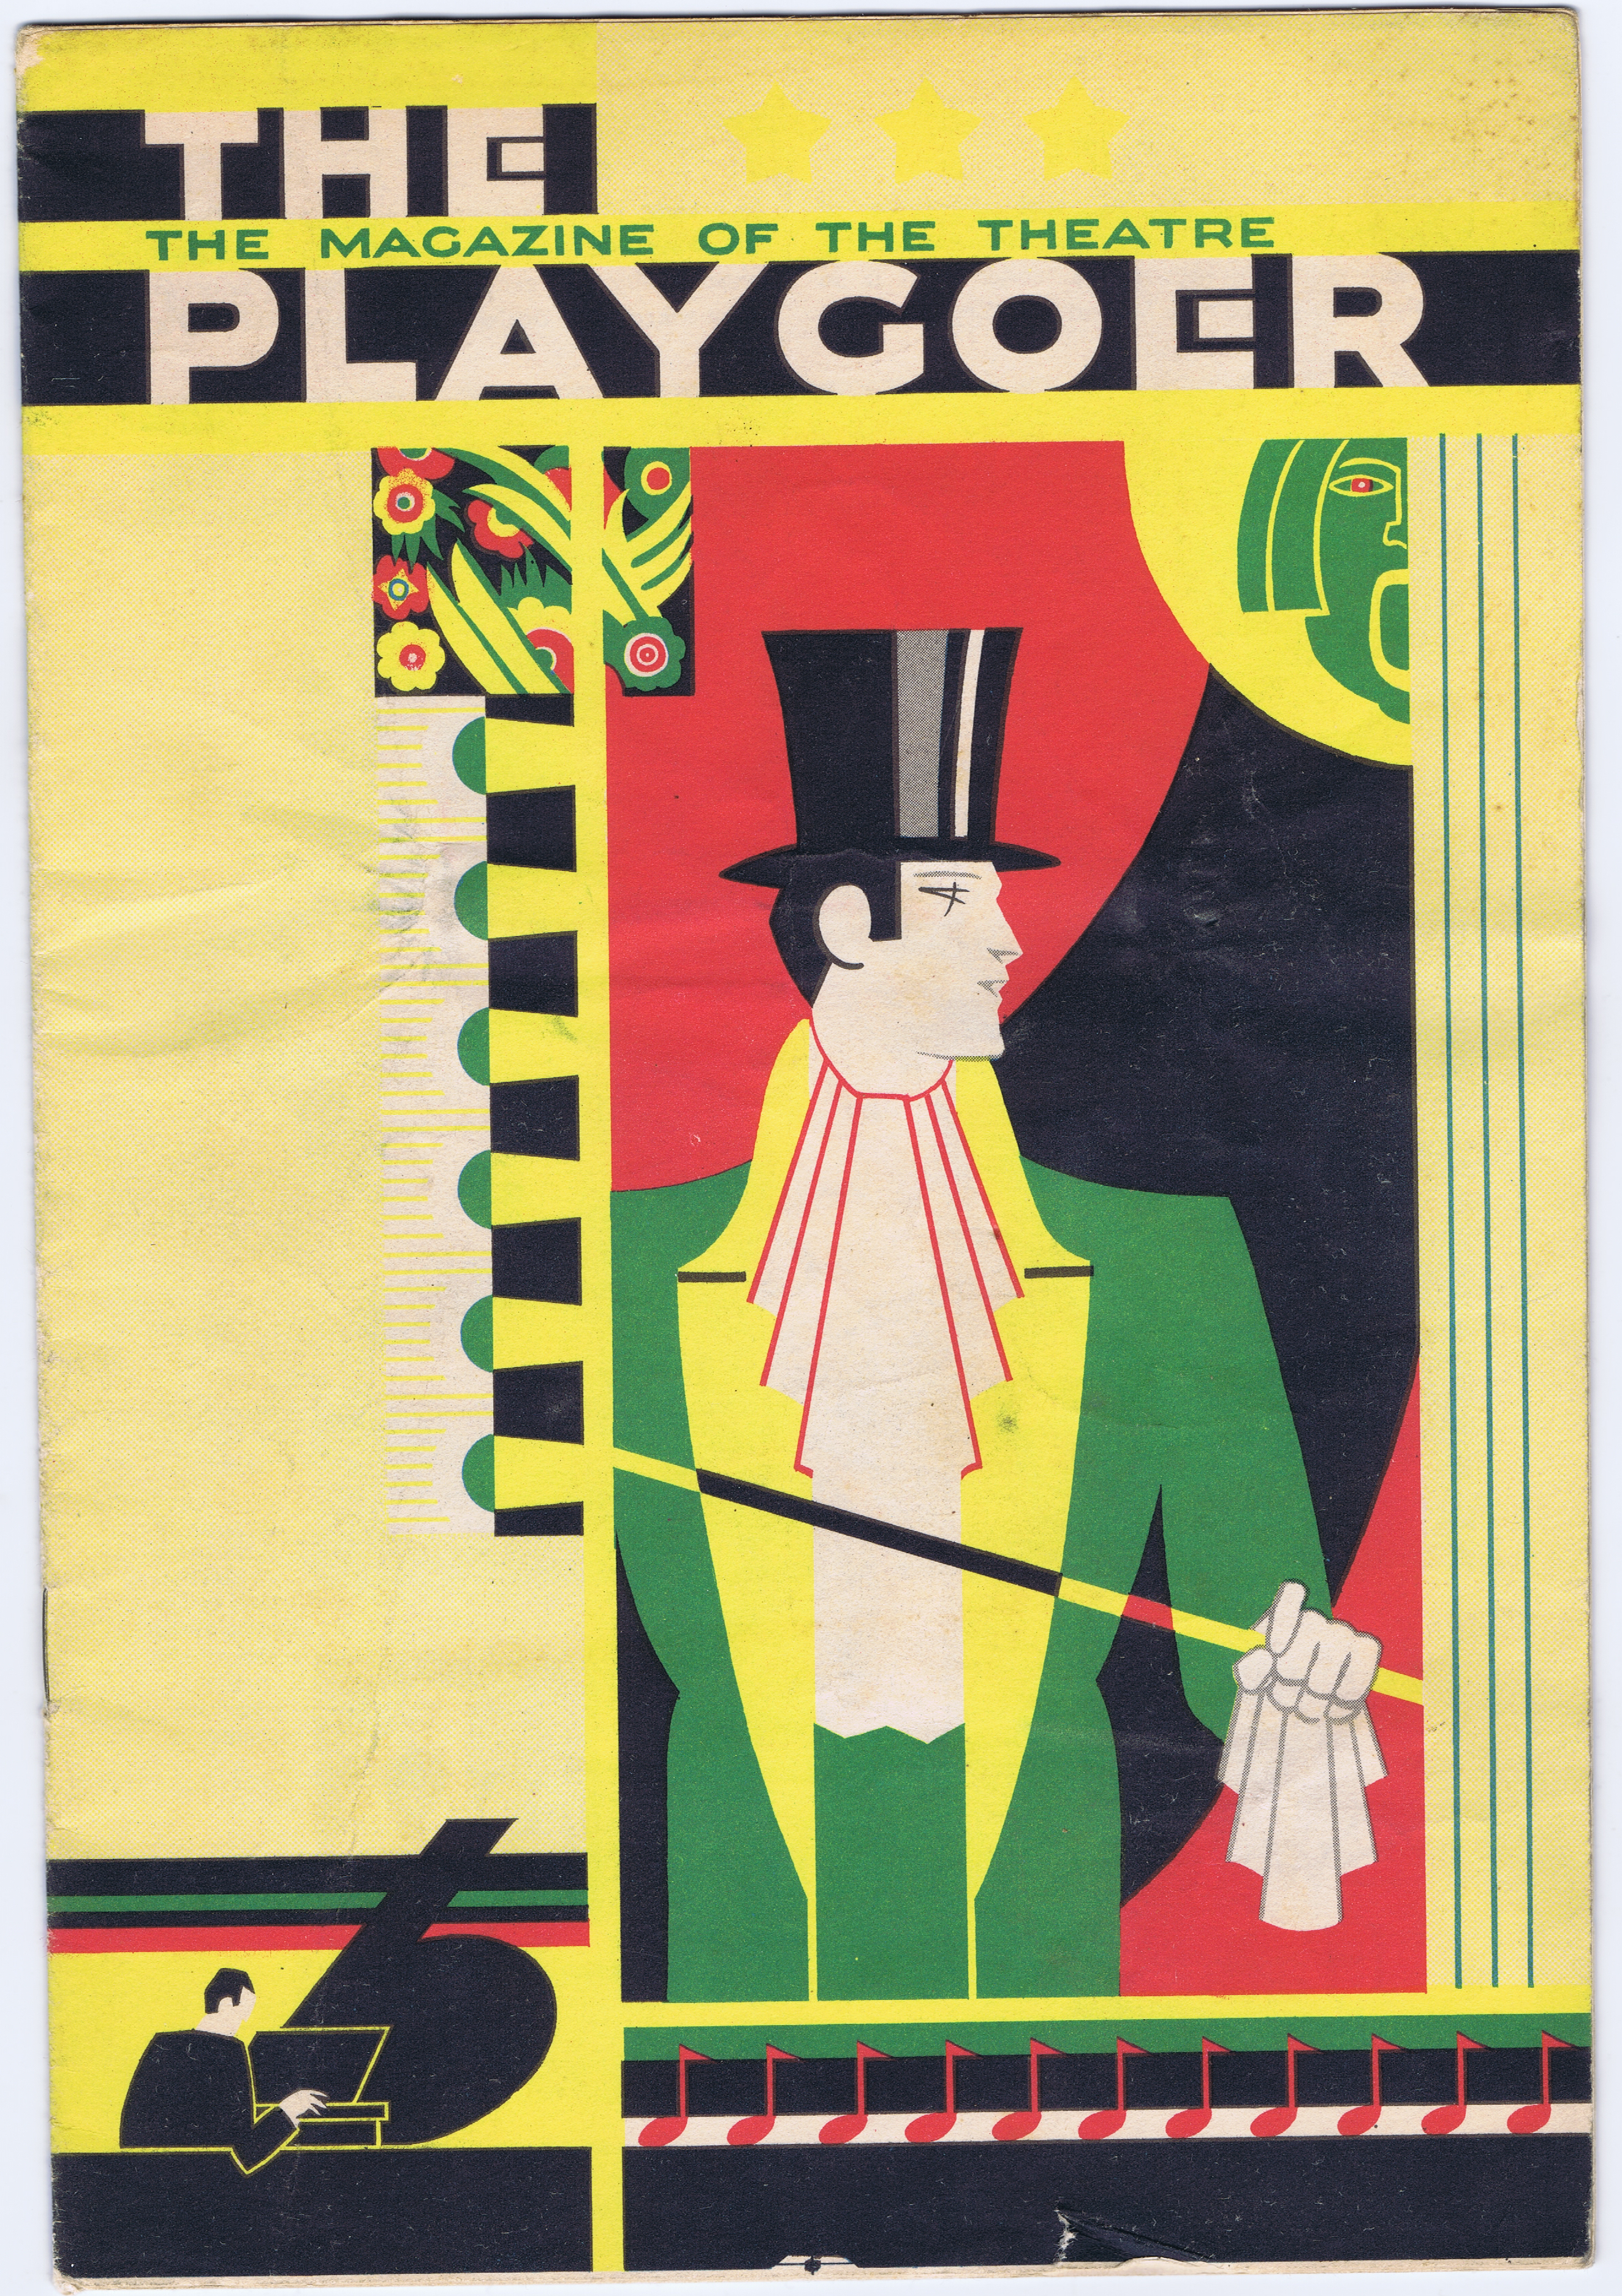 J671	THE PLAYGOER - CHICAGO CA. 1930 - THE MAGAZINE OF THE THEATRE